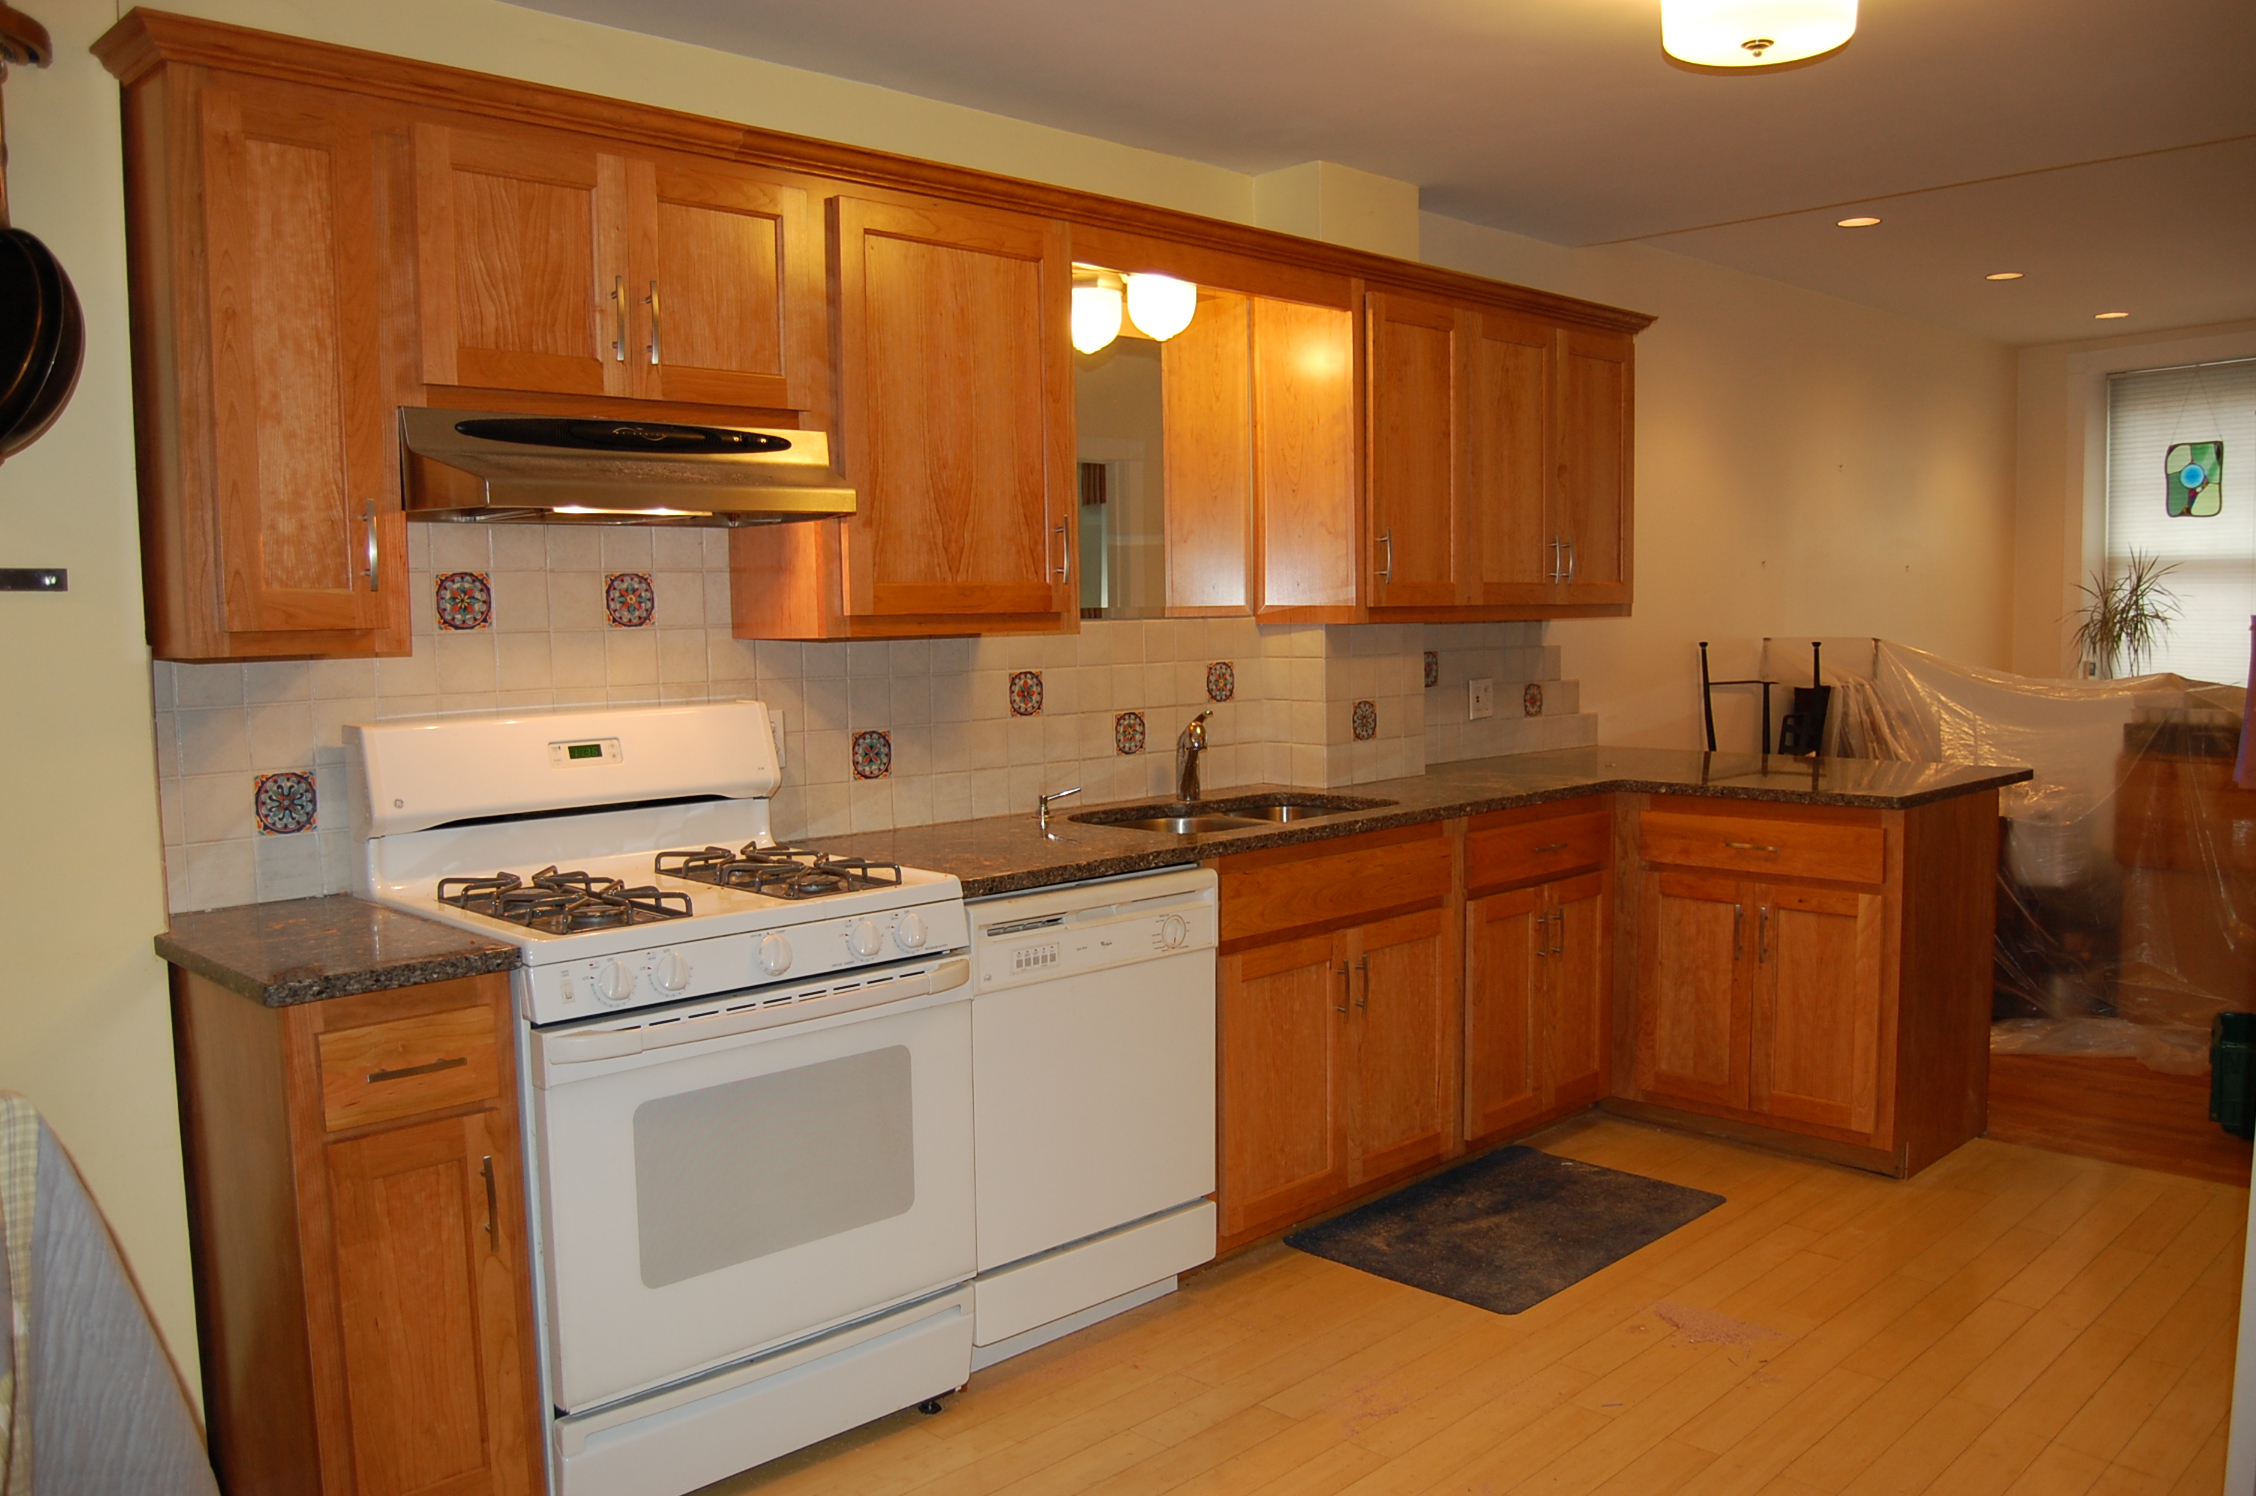 Cabinet Refacing Easy And Quick Kitchen Makeover Option